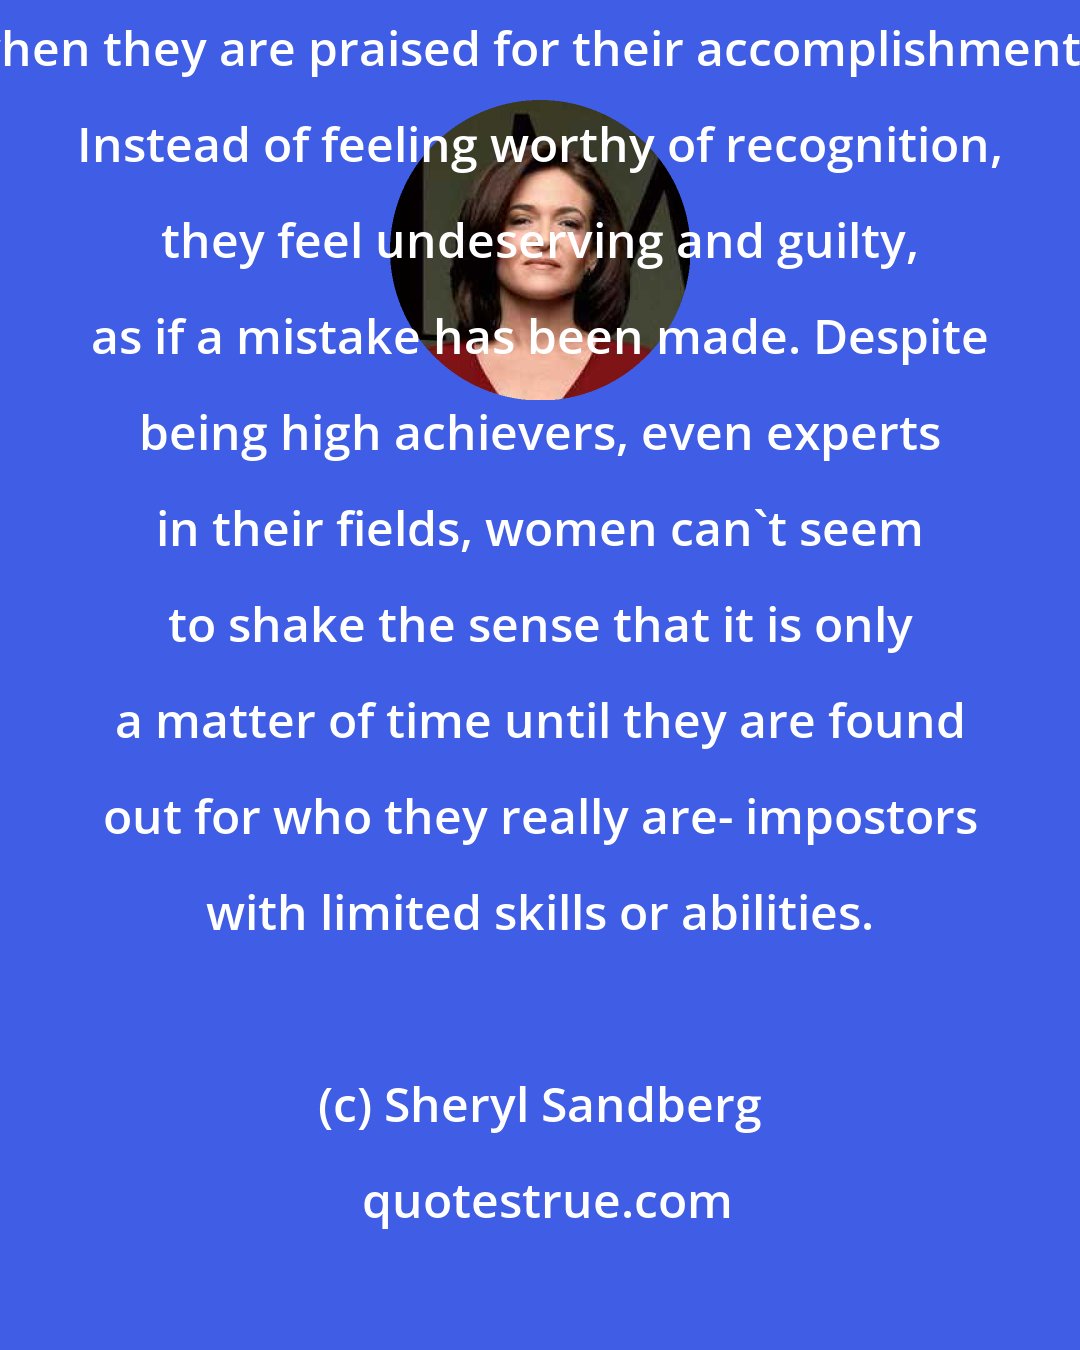 Sheryl Sandberg: She explained that many people, but especially women, feel fraudulent when they are praised for their accomplishments. Instead of feeling worthy of recognition, they feel undeserving and guilty, as if a mistake has been made. Despite being high achievers, even experts in their fields, women can't seem to shake the sense that it is only a matter of time until they are found out for who they really are- impostors with limited skills or abilities.